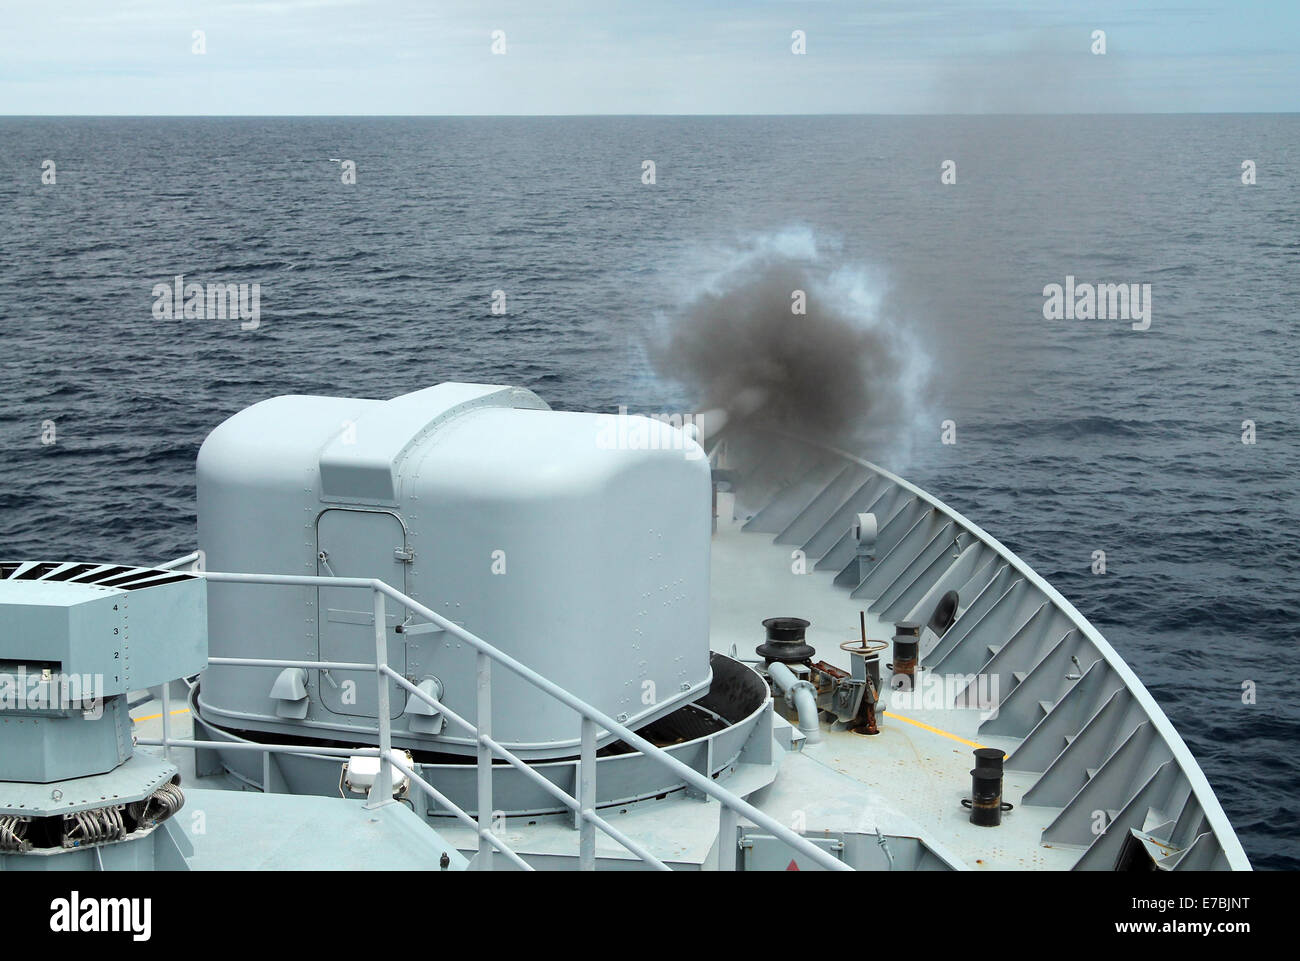 Finnish Navy Ship (FNS) Uusimaa During a Gunfire Exercise. Stock Photo